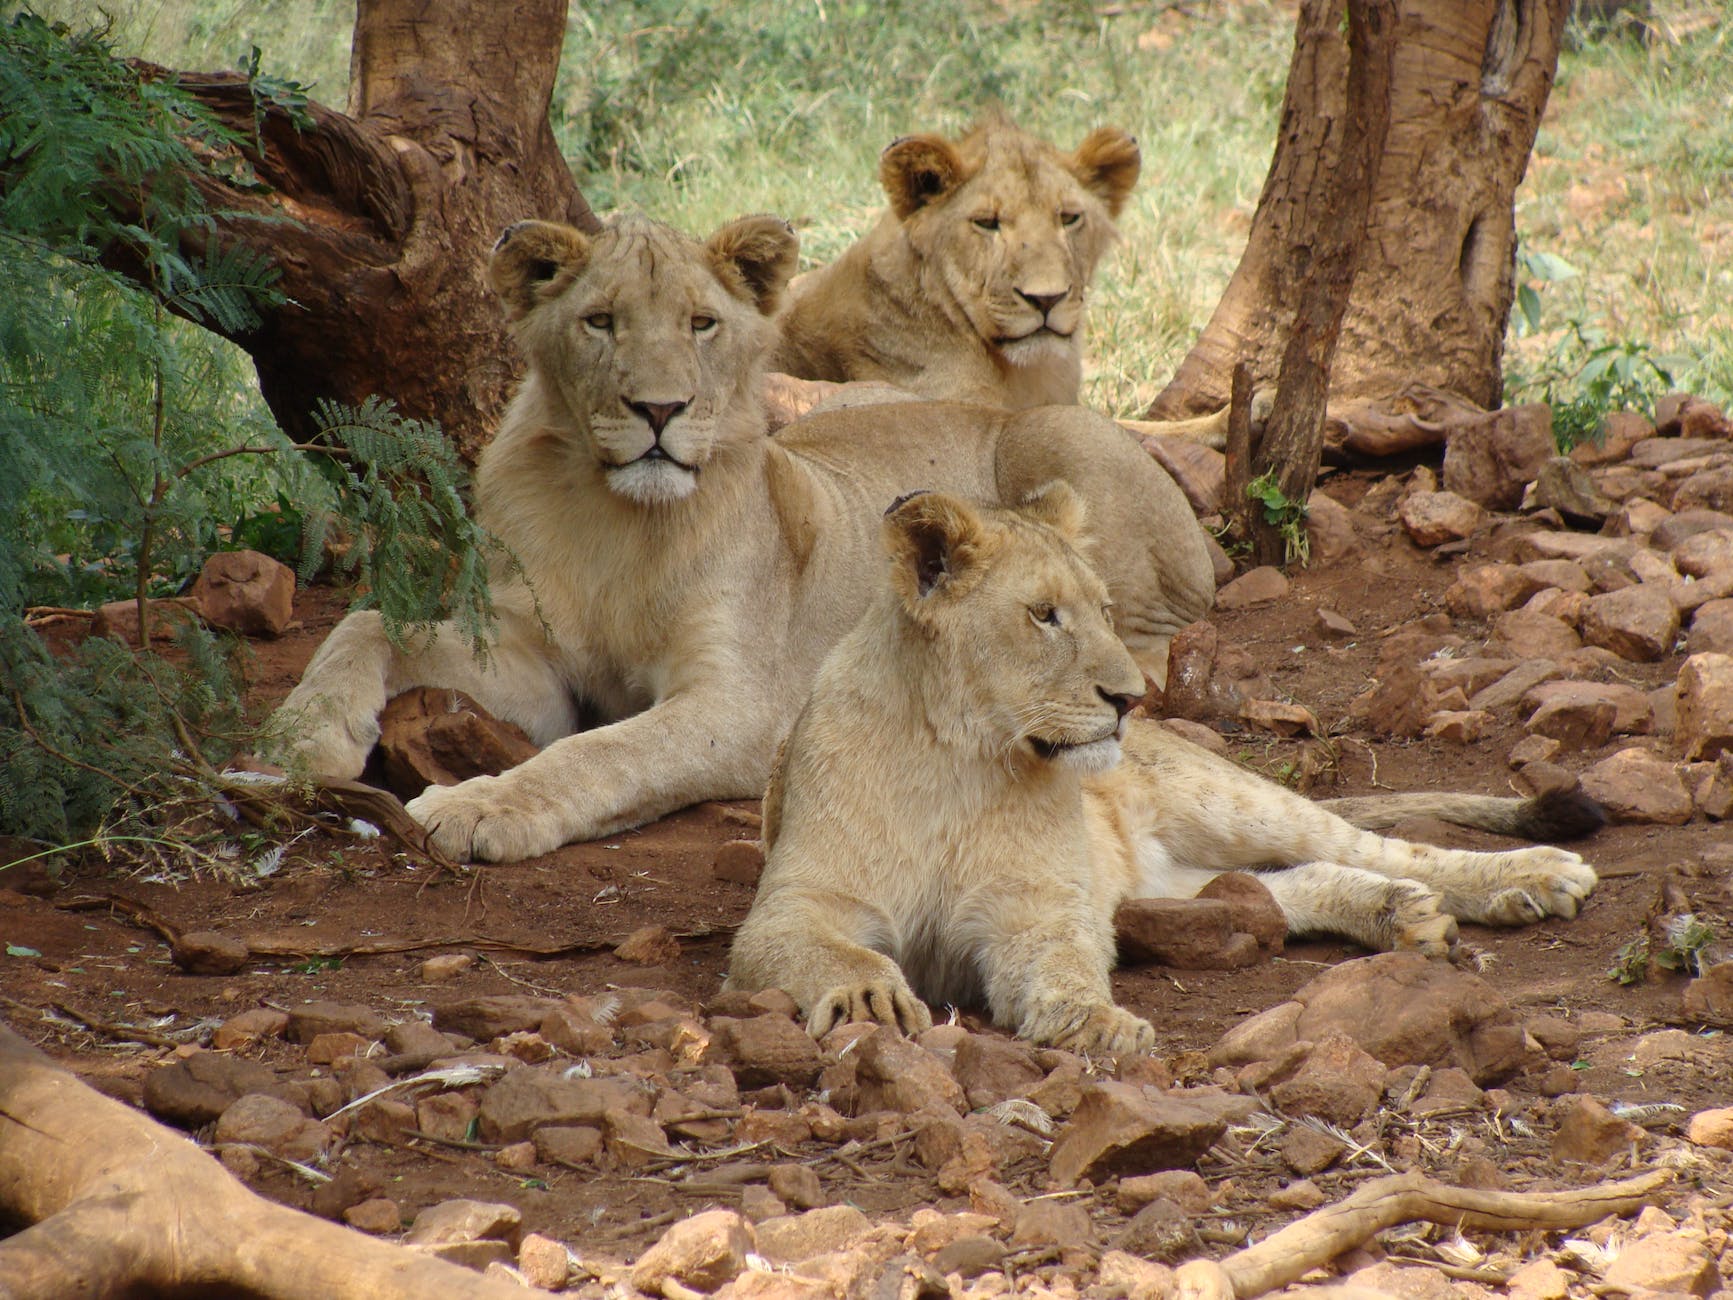 We do not do life or death alone; we always walk together. Image of 3 lionesses lounging in the shade.